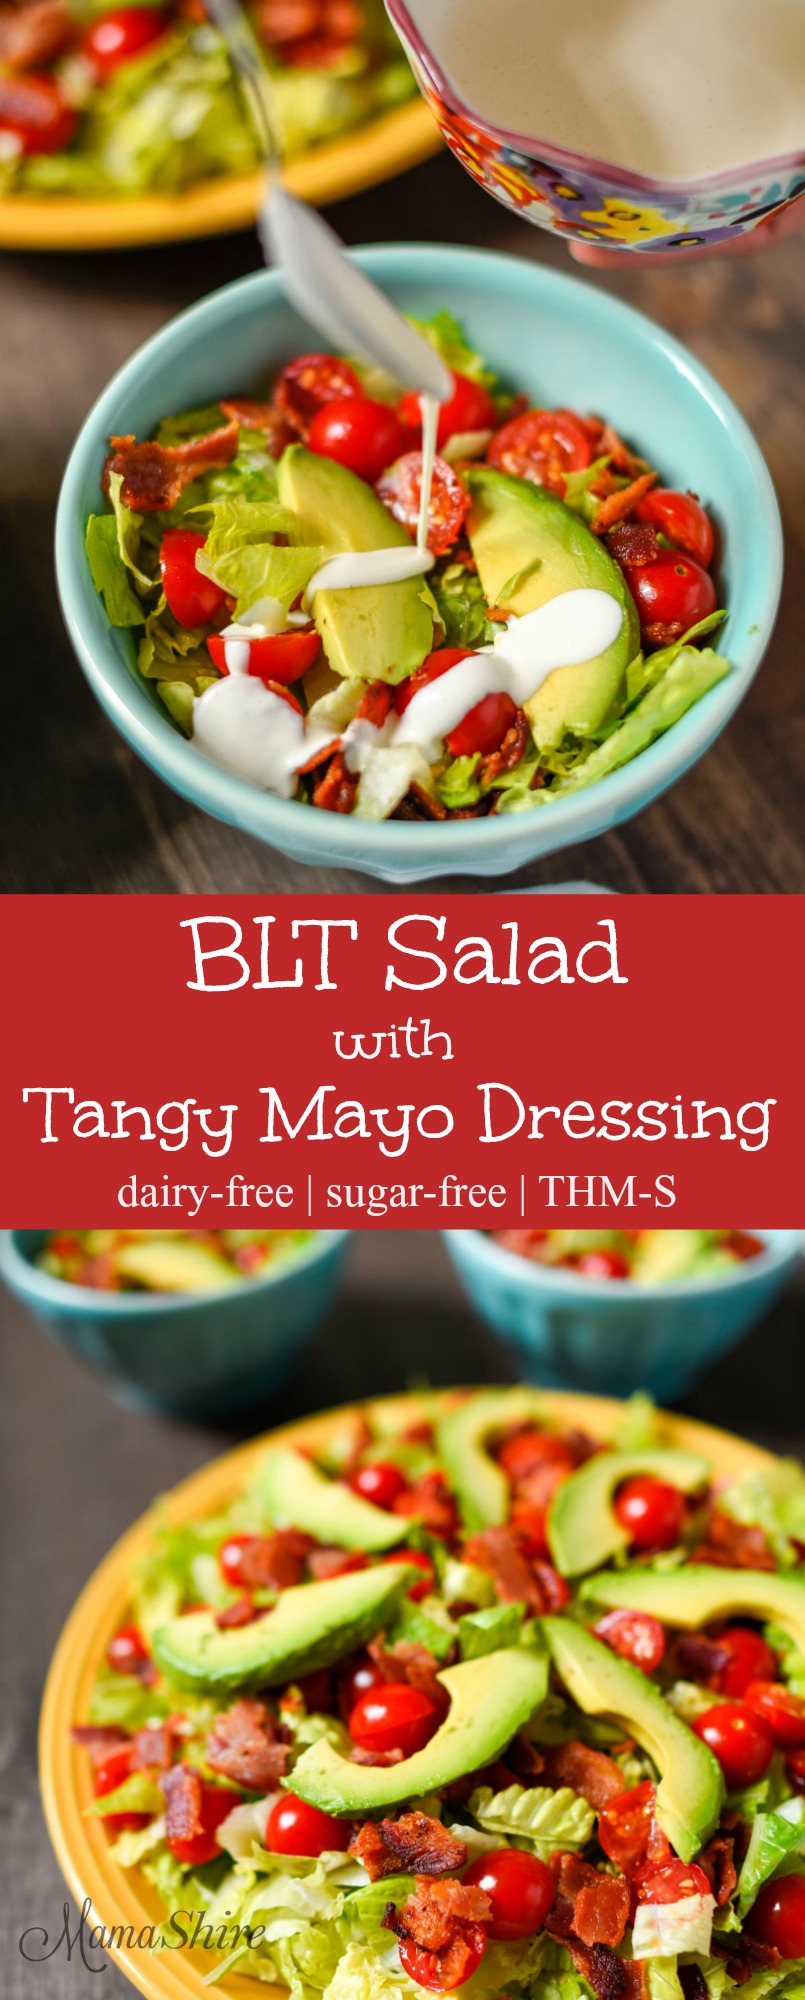 BLT Salad with Tangy Mayo Dressing - Dairy-free, Low-carb, THM-S